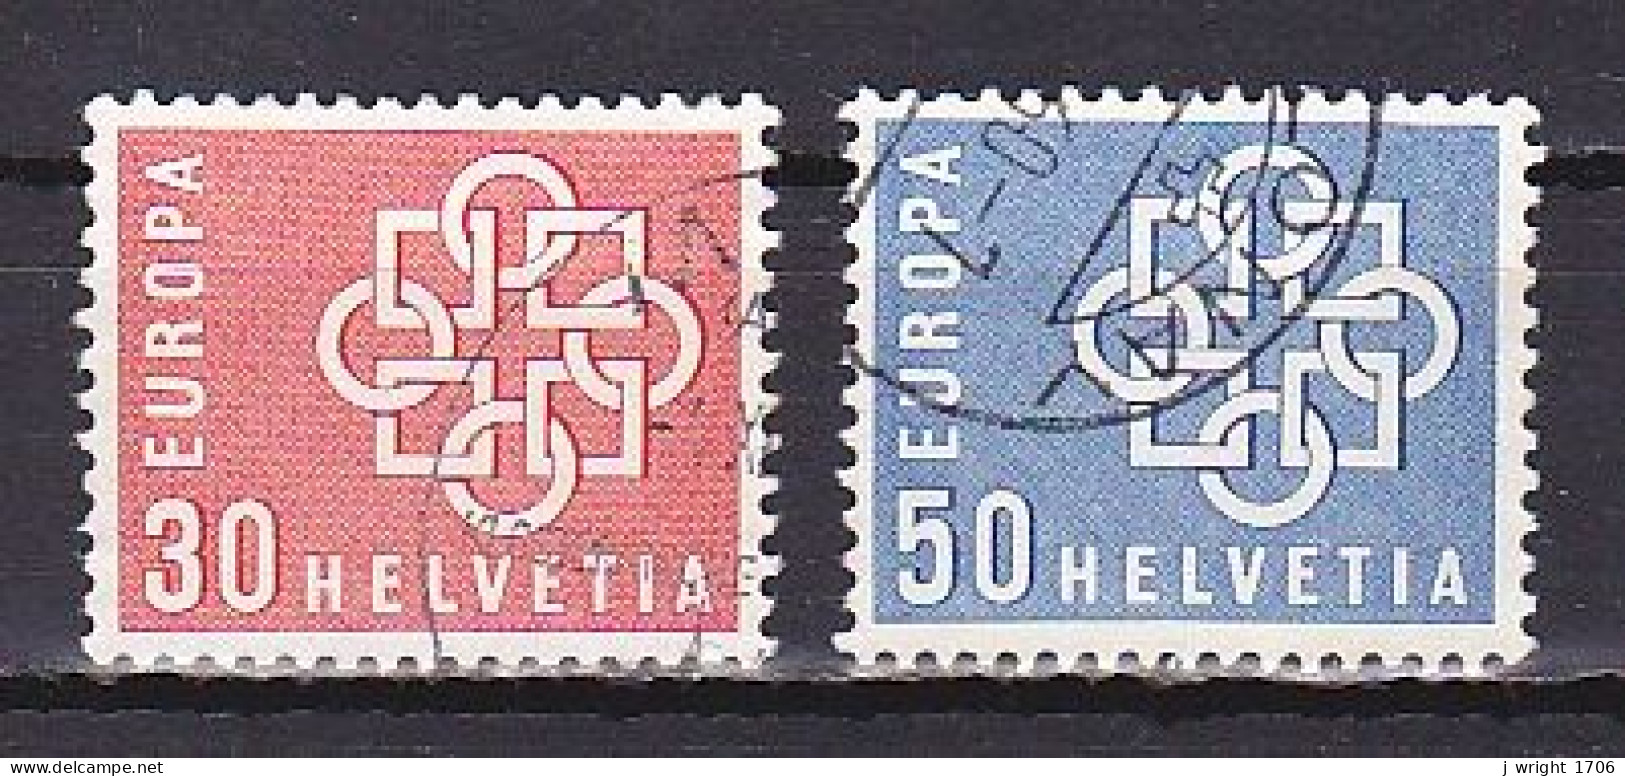 Switzerland, 1959, Europa Issue, Set, USED - Used Stamps